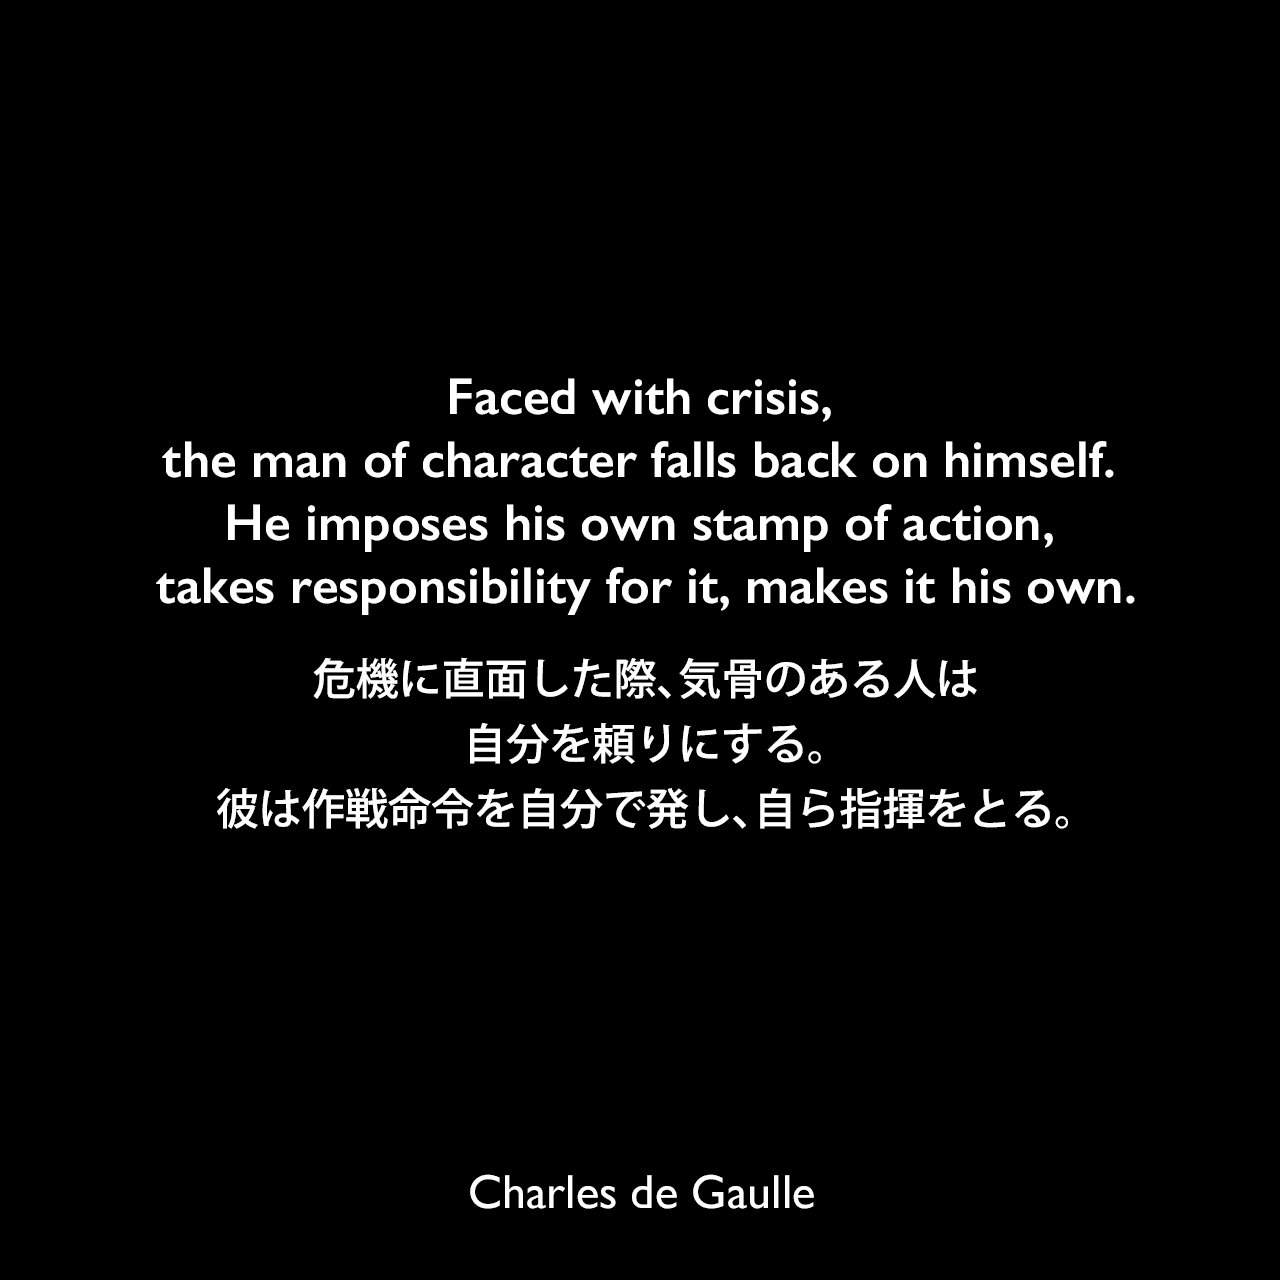 Faced with crisis, the man of character falls back on himself. He imposes his own stamp of action, takes responsibility for it, makes it his own.危機に直面した際、気骨のある人は自分を頼りにする。彼は作戦命令を自分で発し、自ら指揮をとる。Charles de Gaulle